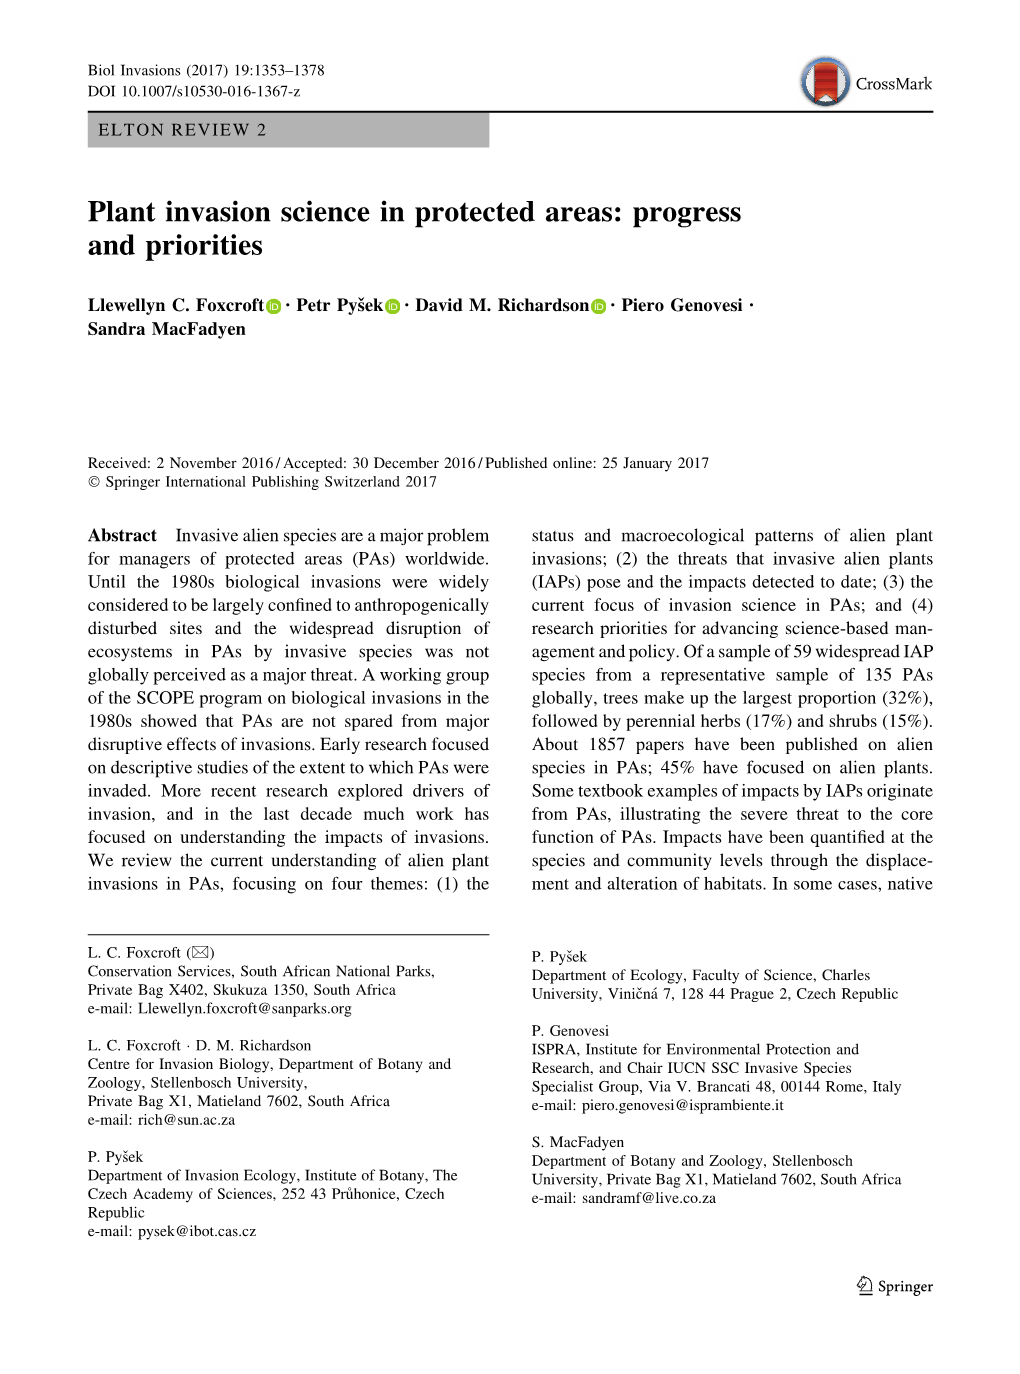 Plant Invasion Science in Protected Areas: Progress and Priorities